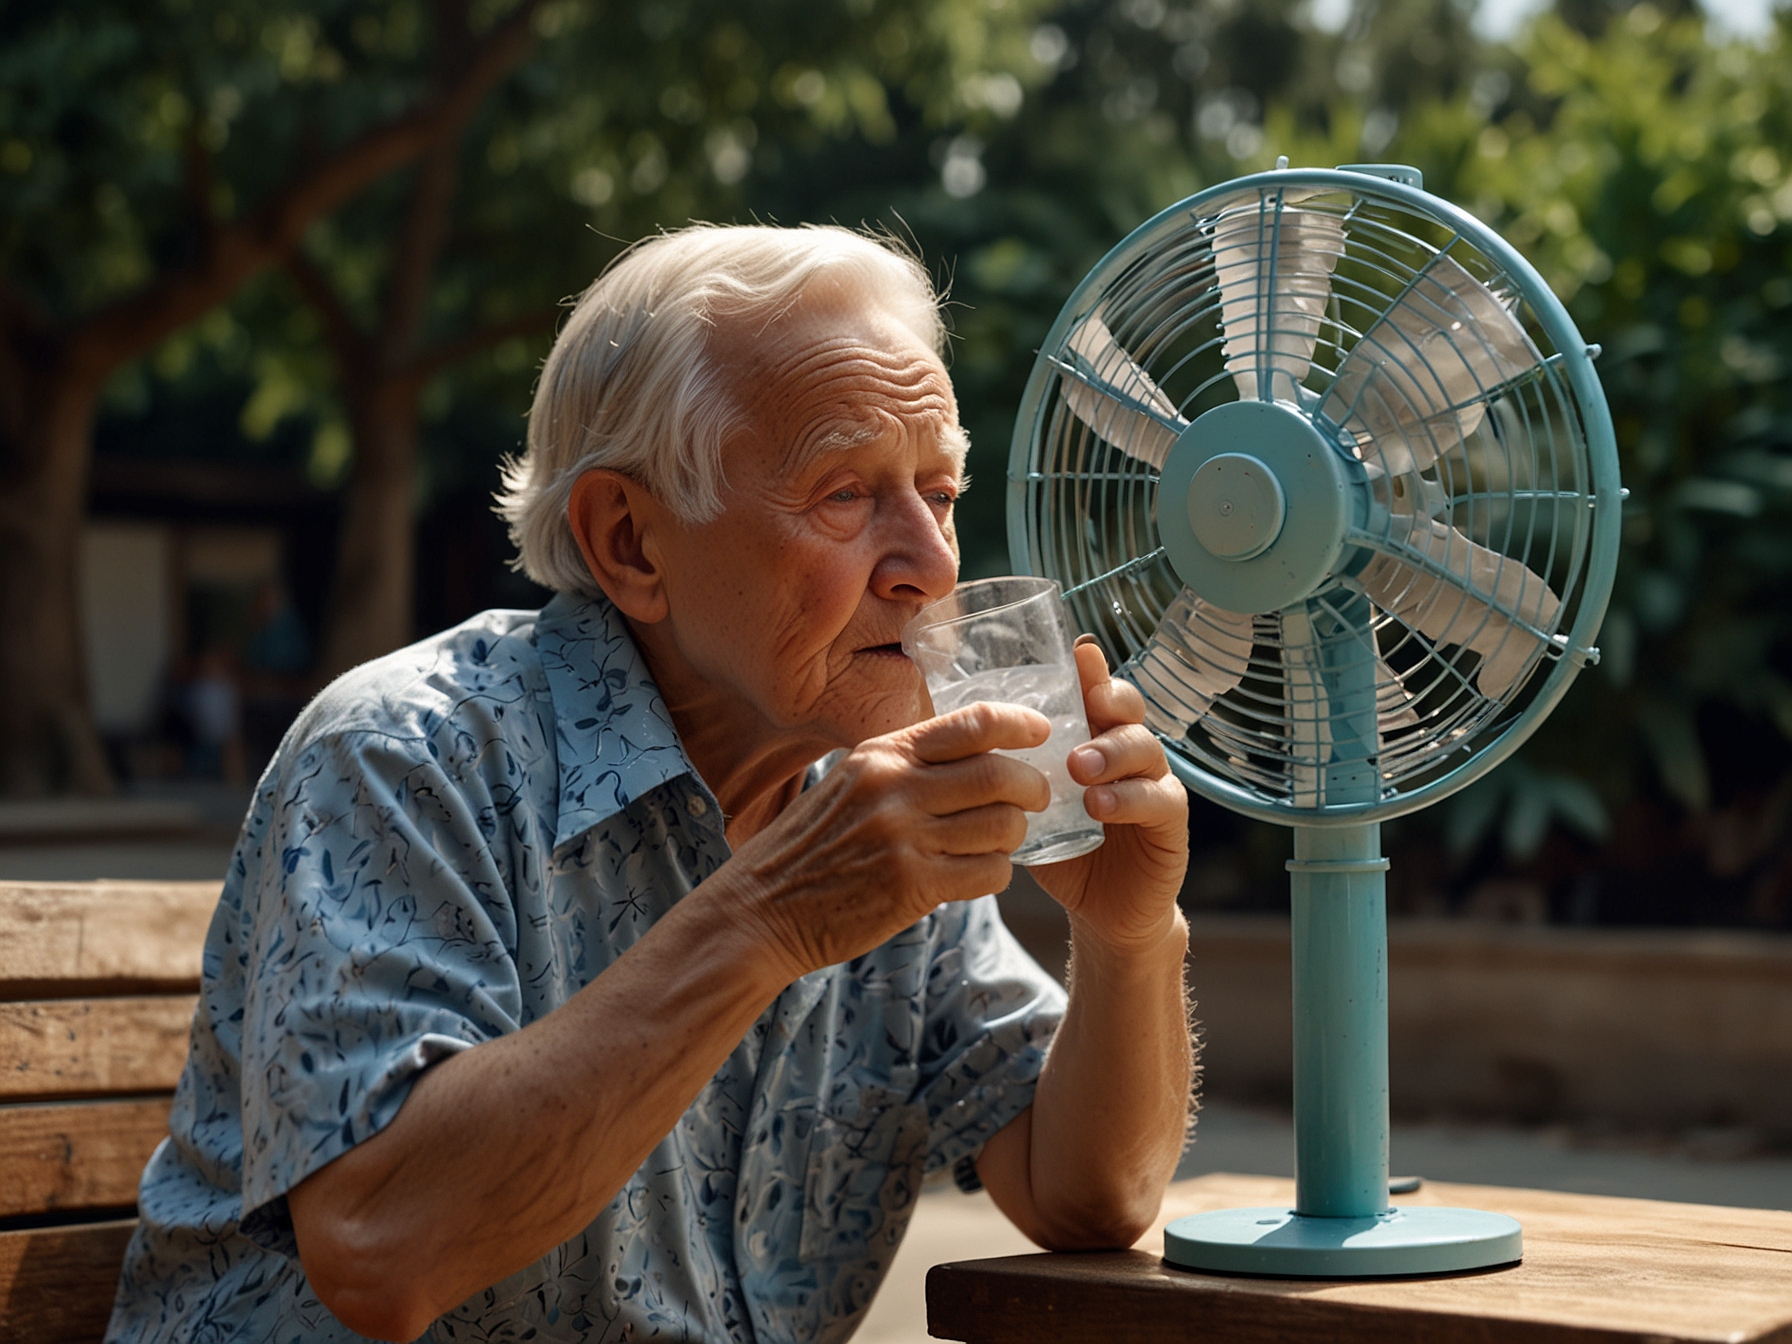 An elderly person using a fan and drinking water during a heatwave, emphasizing the health risks posed by rising temperatures and the importance of public awareness and proper cooling solutions.